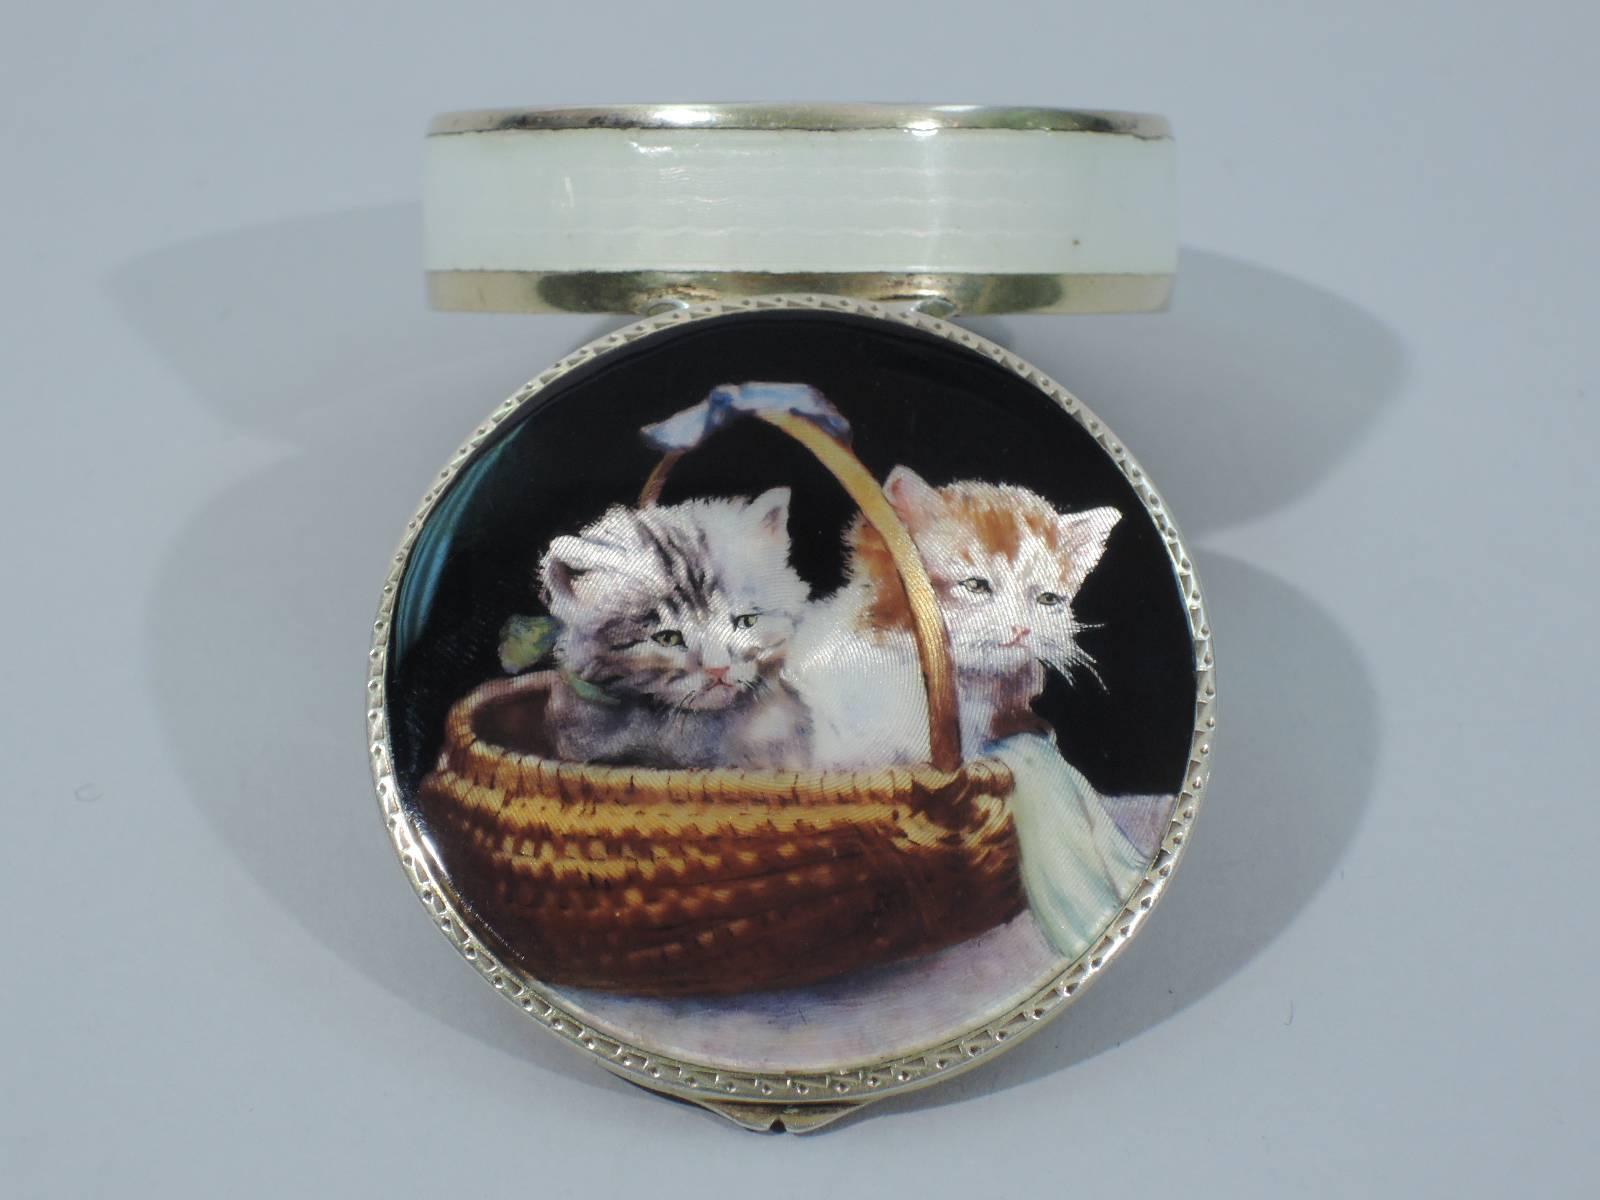 Antique silver gilt and enamel compact with cats in a basket. Round with flat and hinged cover. On cover two kittens cuddle in beribboned basket. They have pink noses, whiskers, and lots of soft fur. They're real fluff balls. Color heightened by